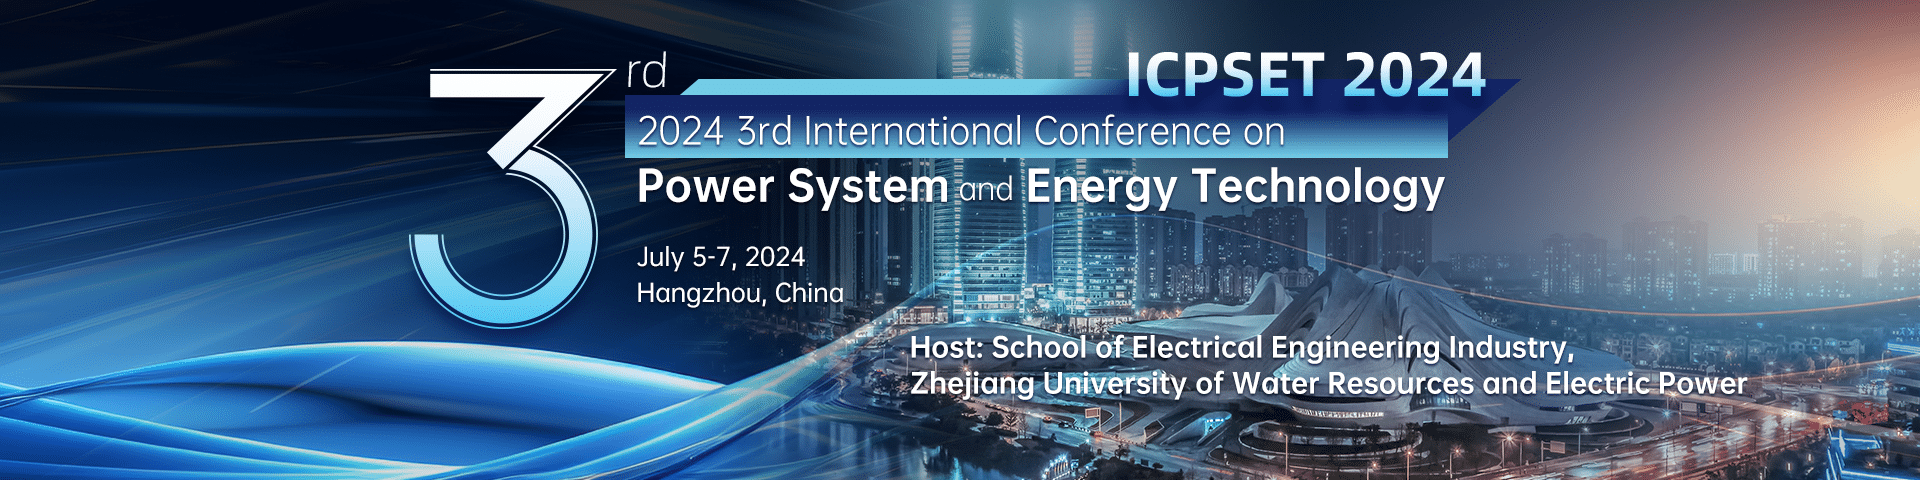 2024 3rd International Conference on Power System and Energy Technology (ICPSET 2024)